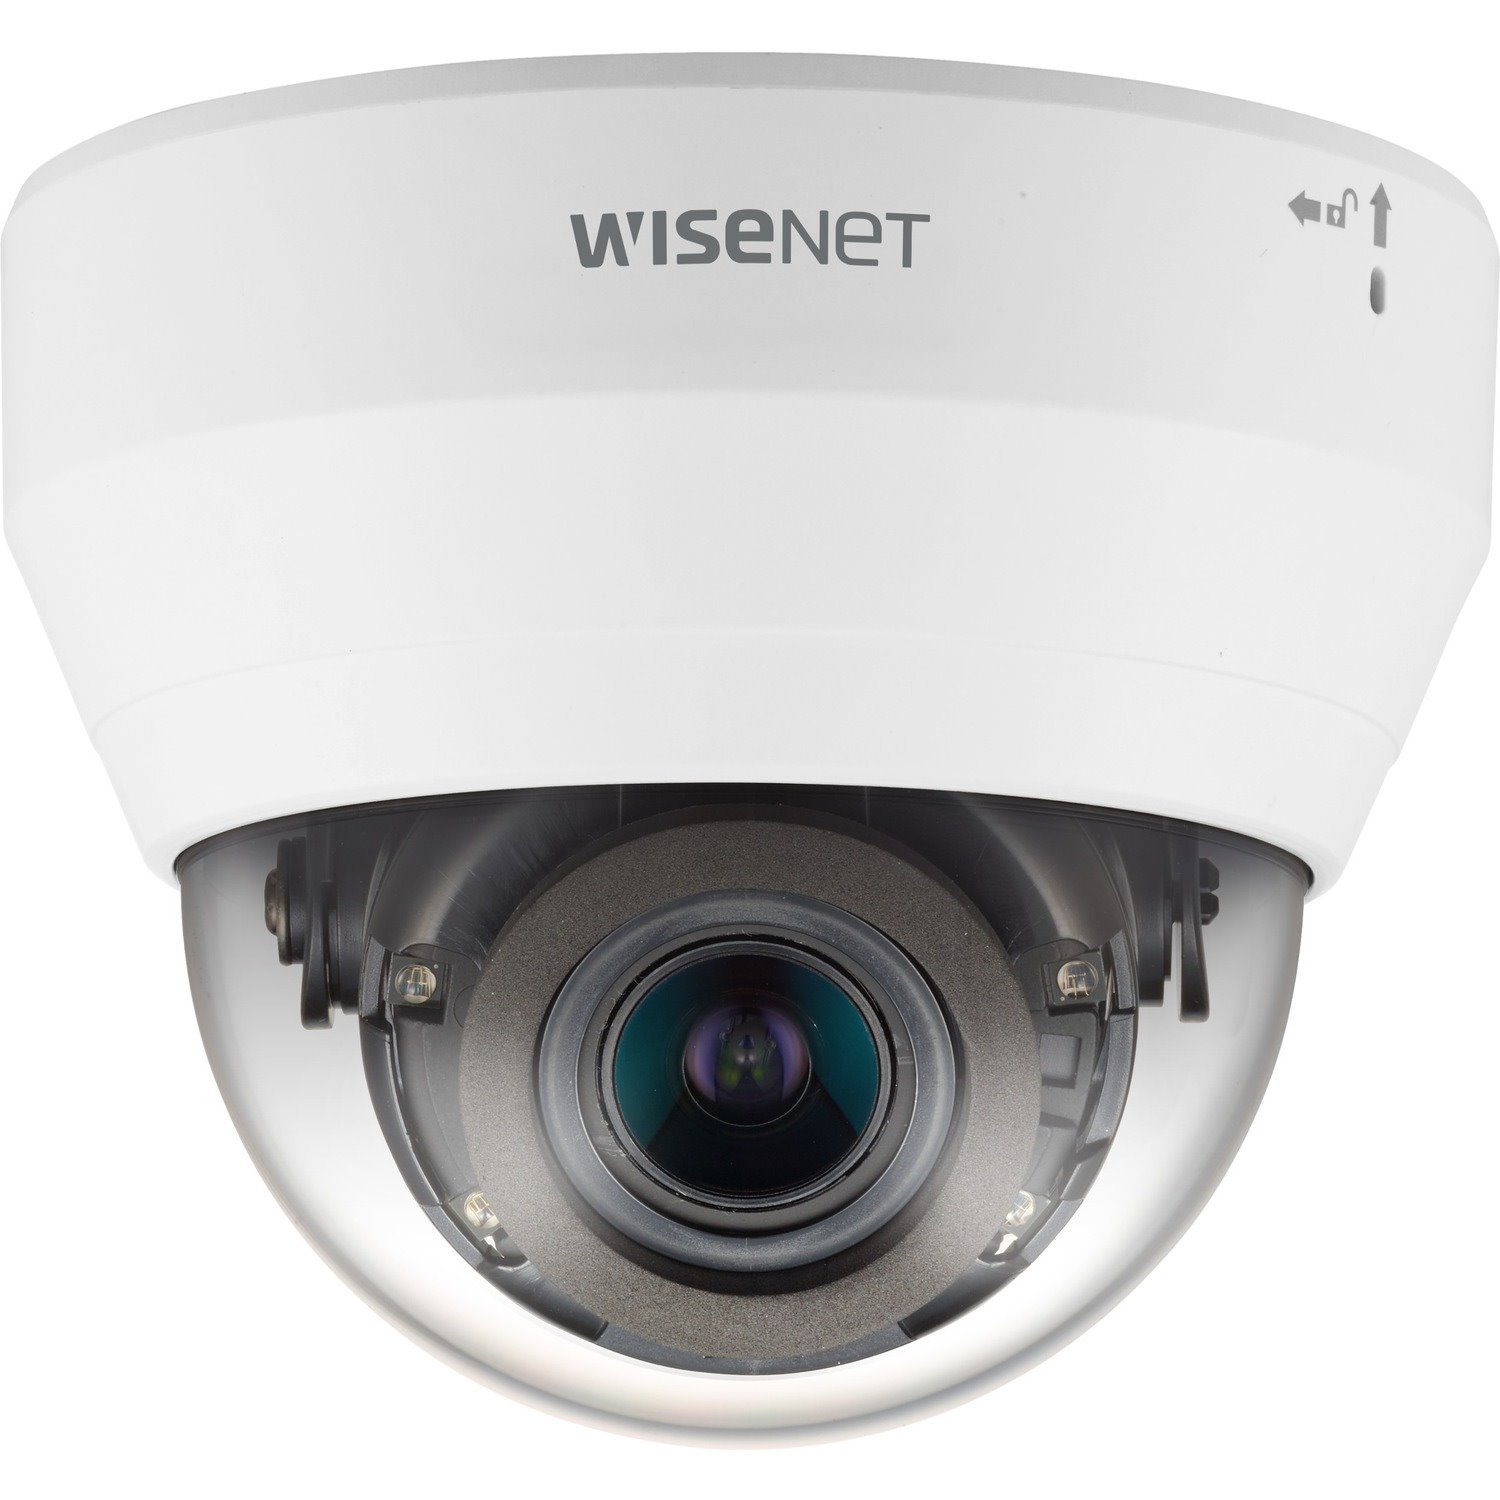 Wisenet QND-7082R 4 Megapixel Indoor Network Camera - Colour - Dome - White